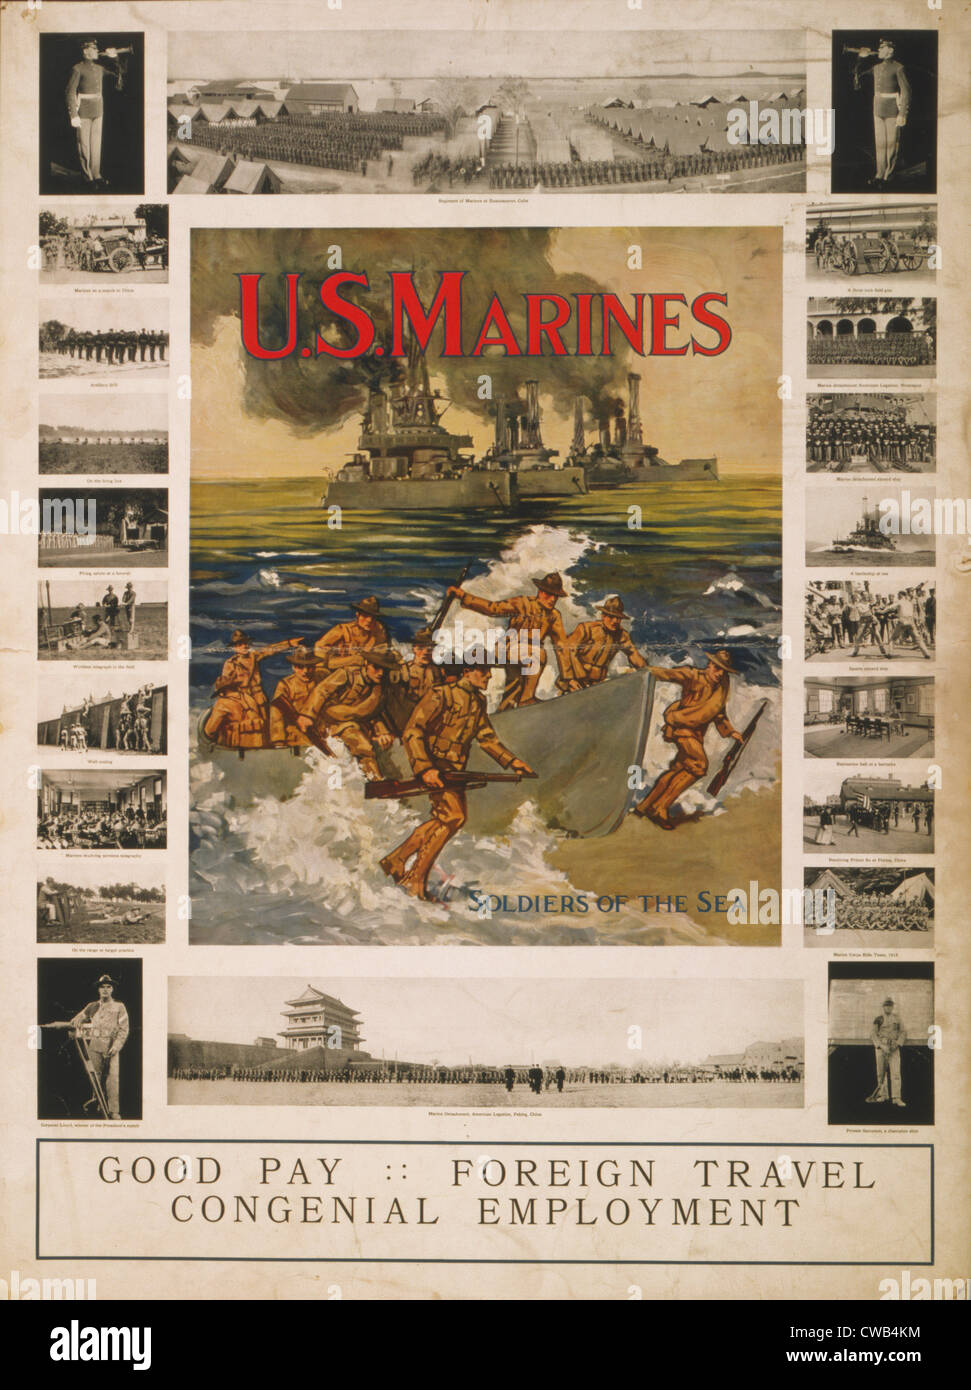 U.S. Marines recruitment poster showing marines coming ashore with ships in background, shows a series of views of marines Stock Photo